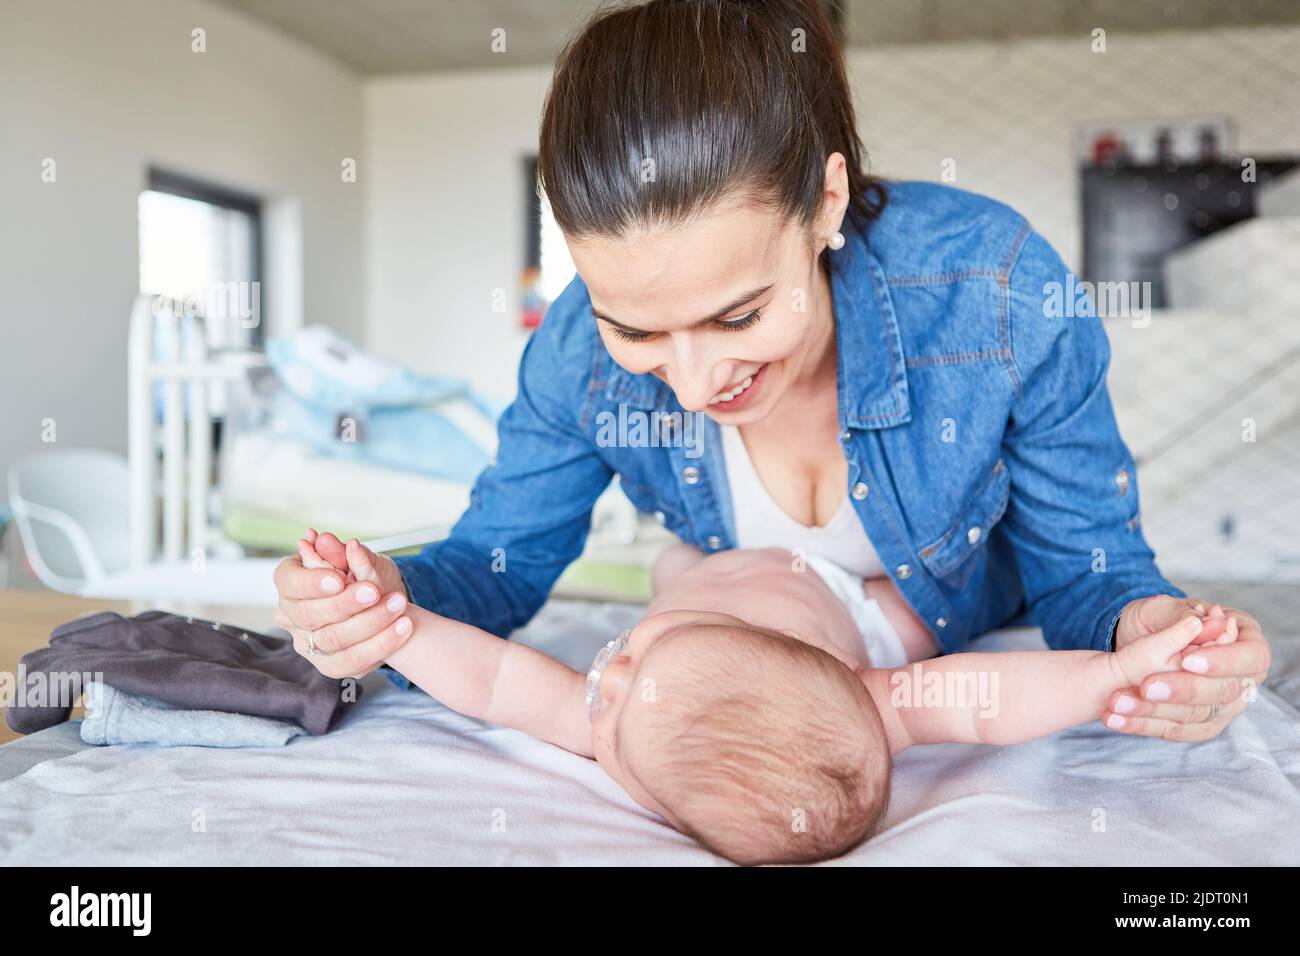 Mother holds her newborn baby by hands while changing diaper on the changing table Stock Photo